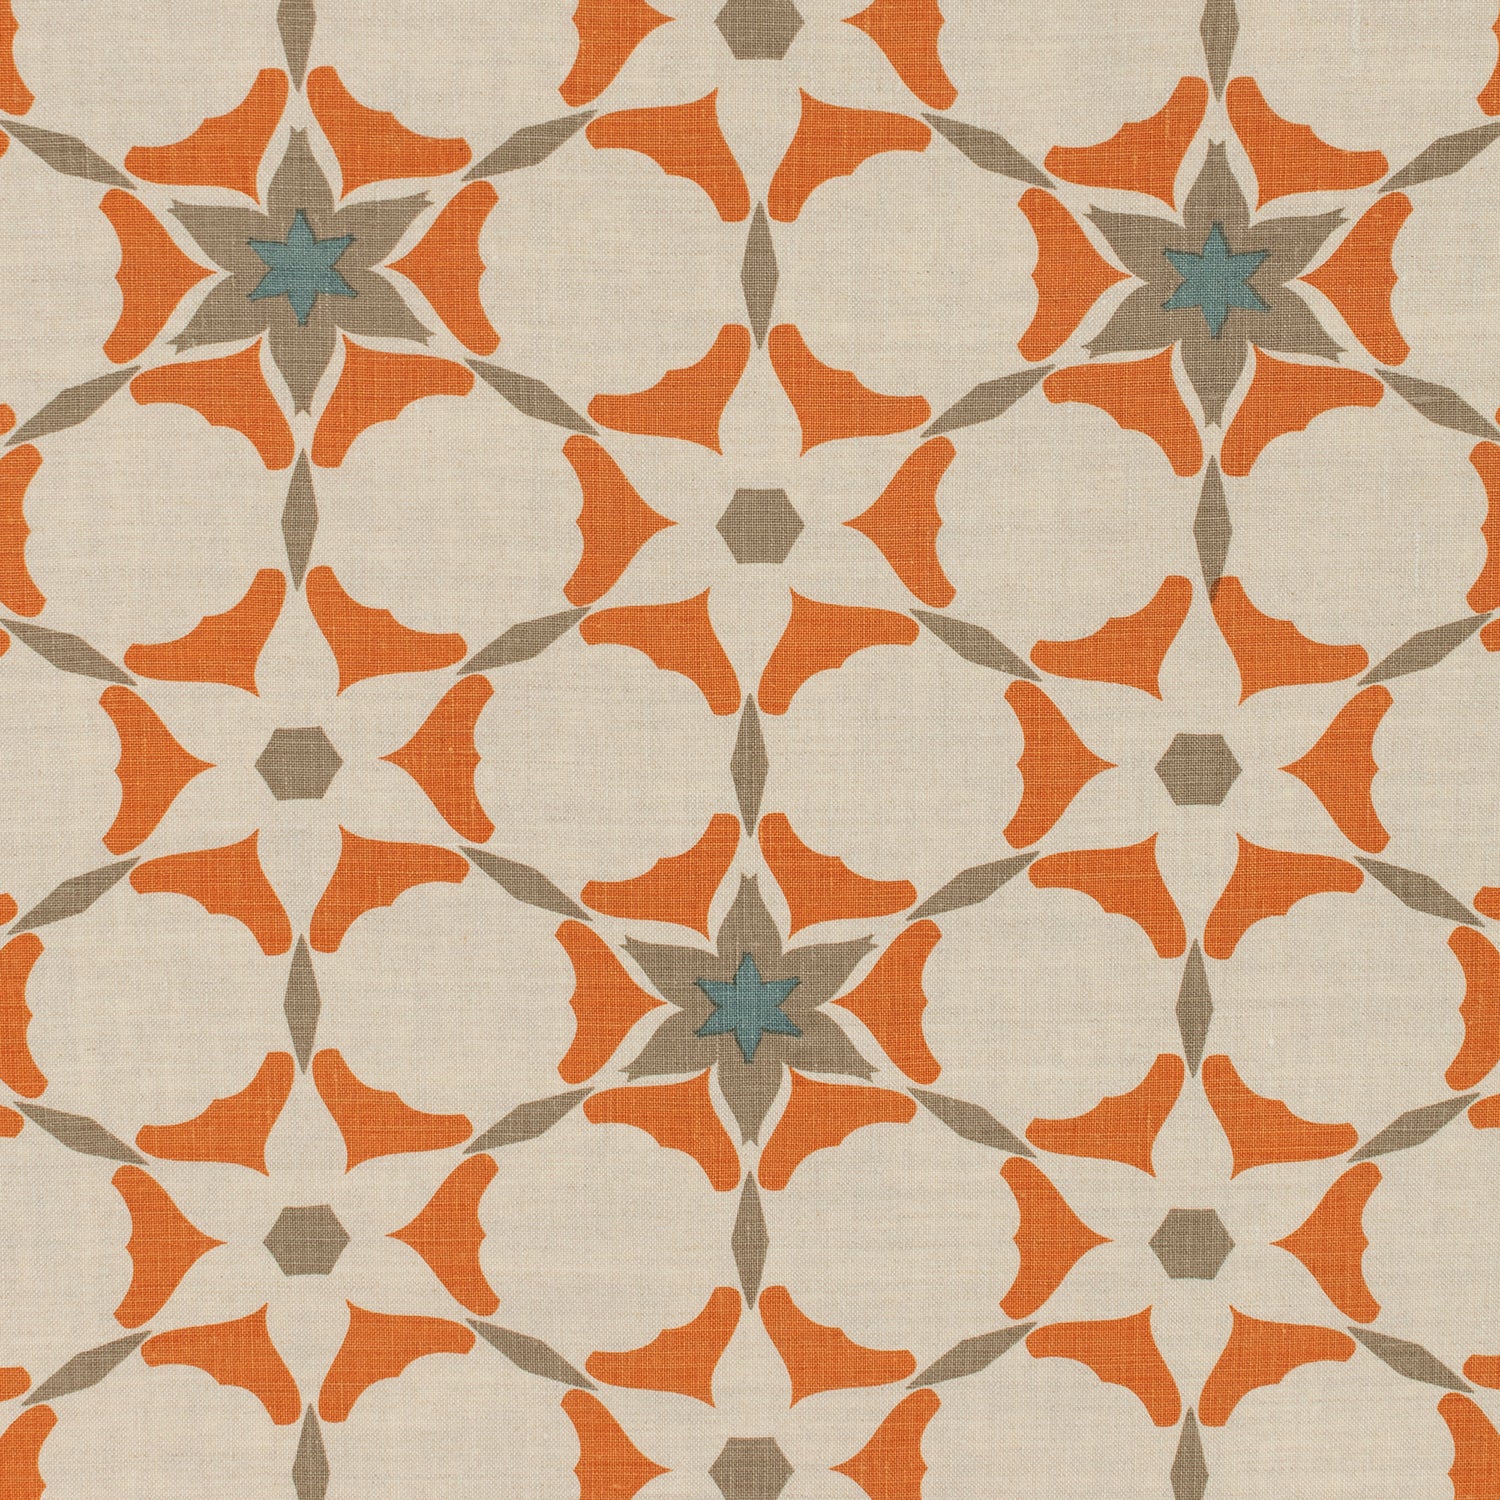 Detail of fabric in a geometric star print in shades of coral and brown on a tan field.